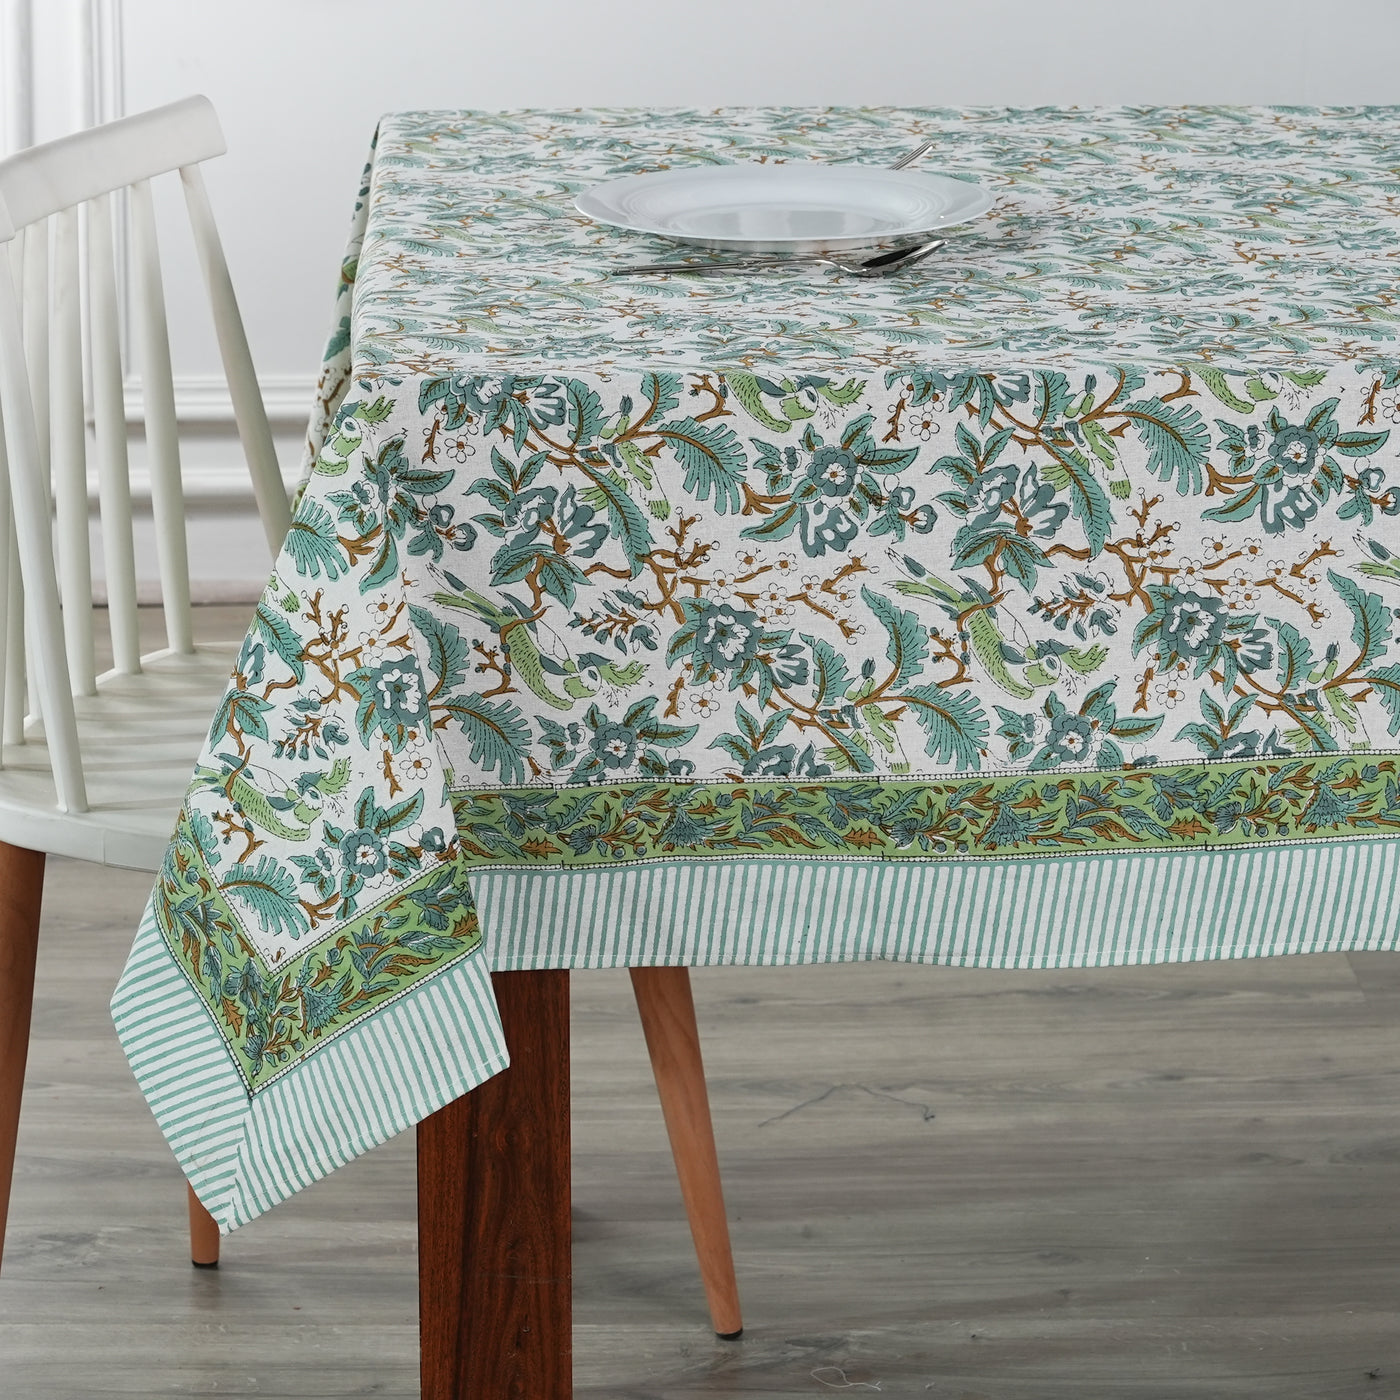 Fabricrush Sage Green Russian Green Peanut Butter Indian Printed Floral Tablecloth Dinner Party Housewarming Cocktail Tableclover